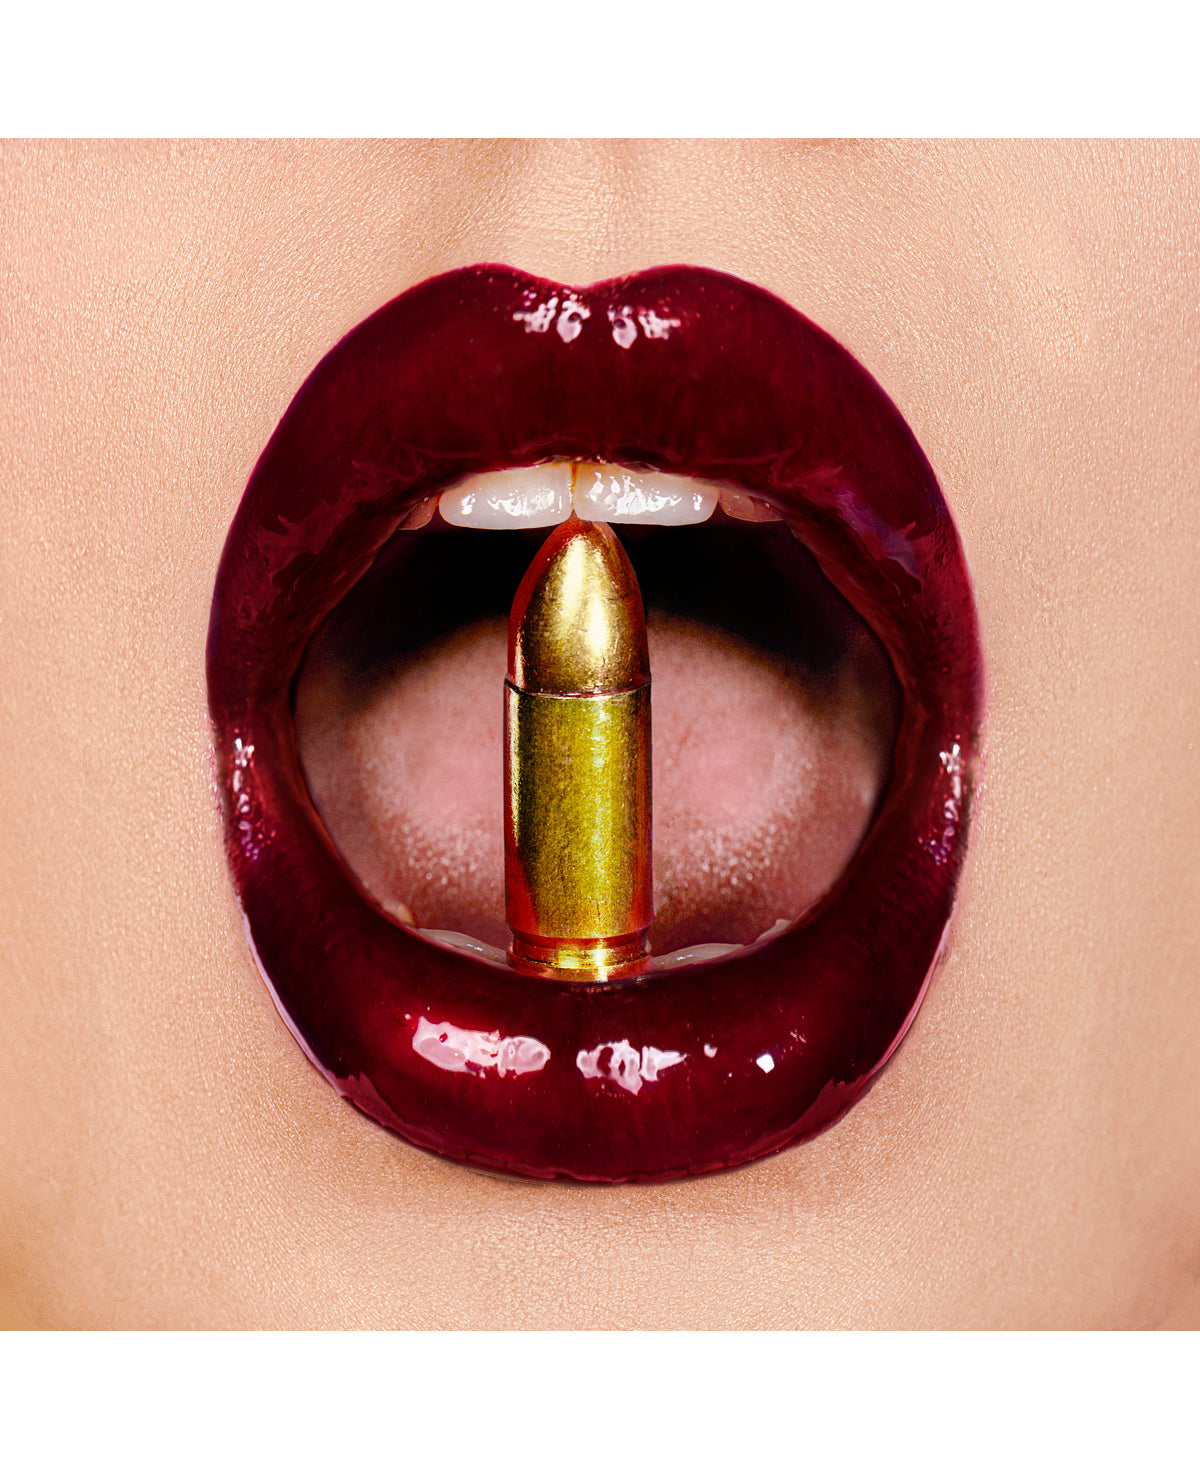 KISS MY BULLET / POP ART / Limited Editions from €200,- Worldwide shipping 